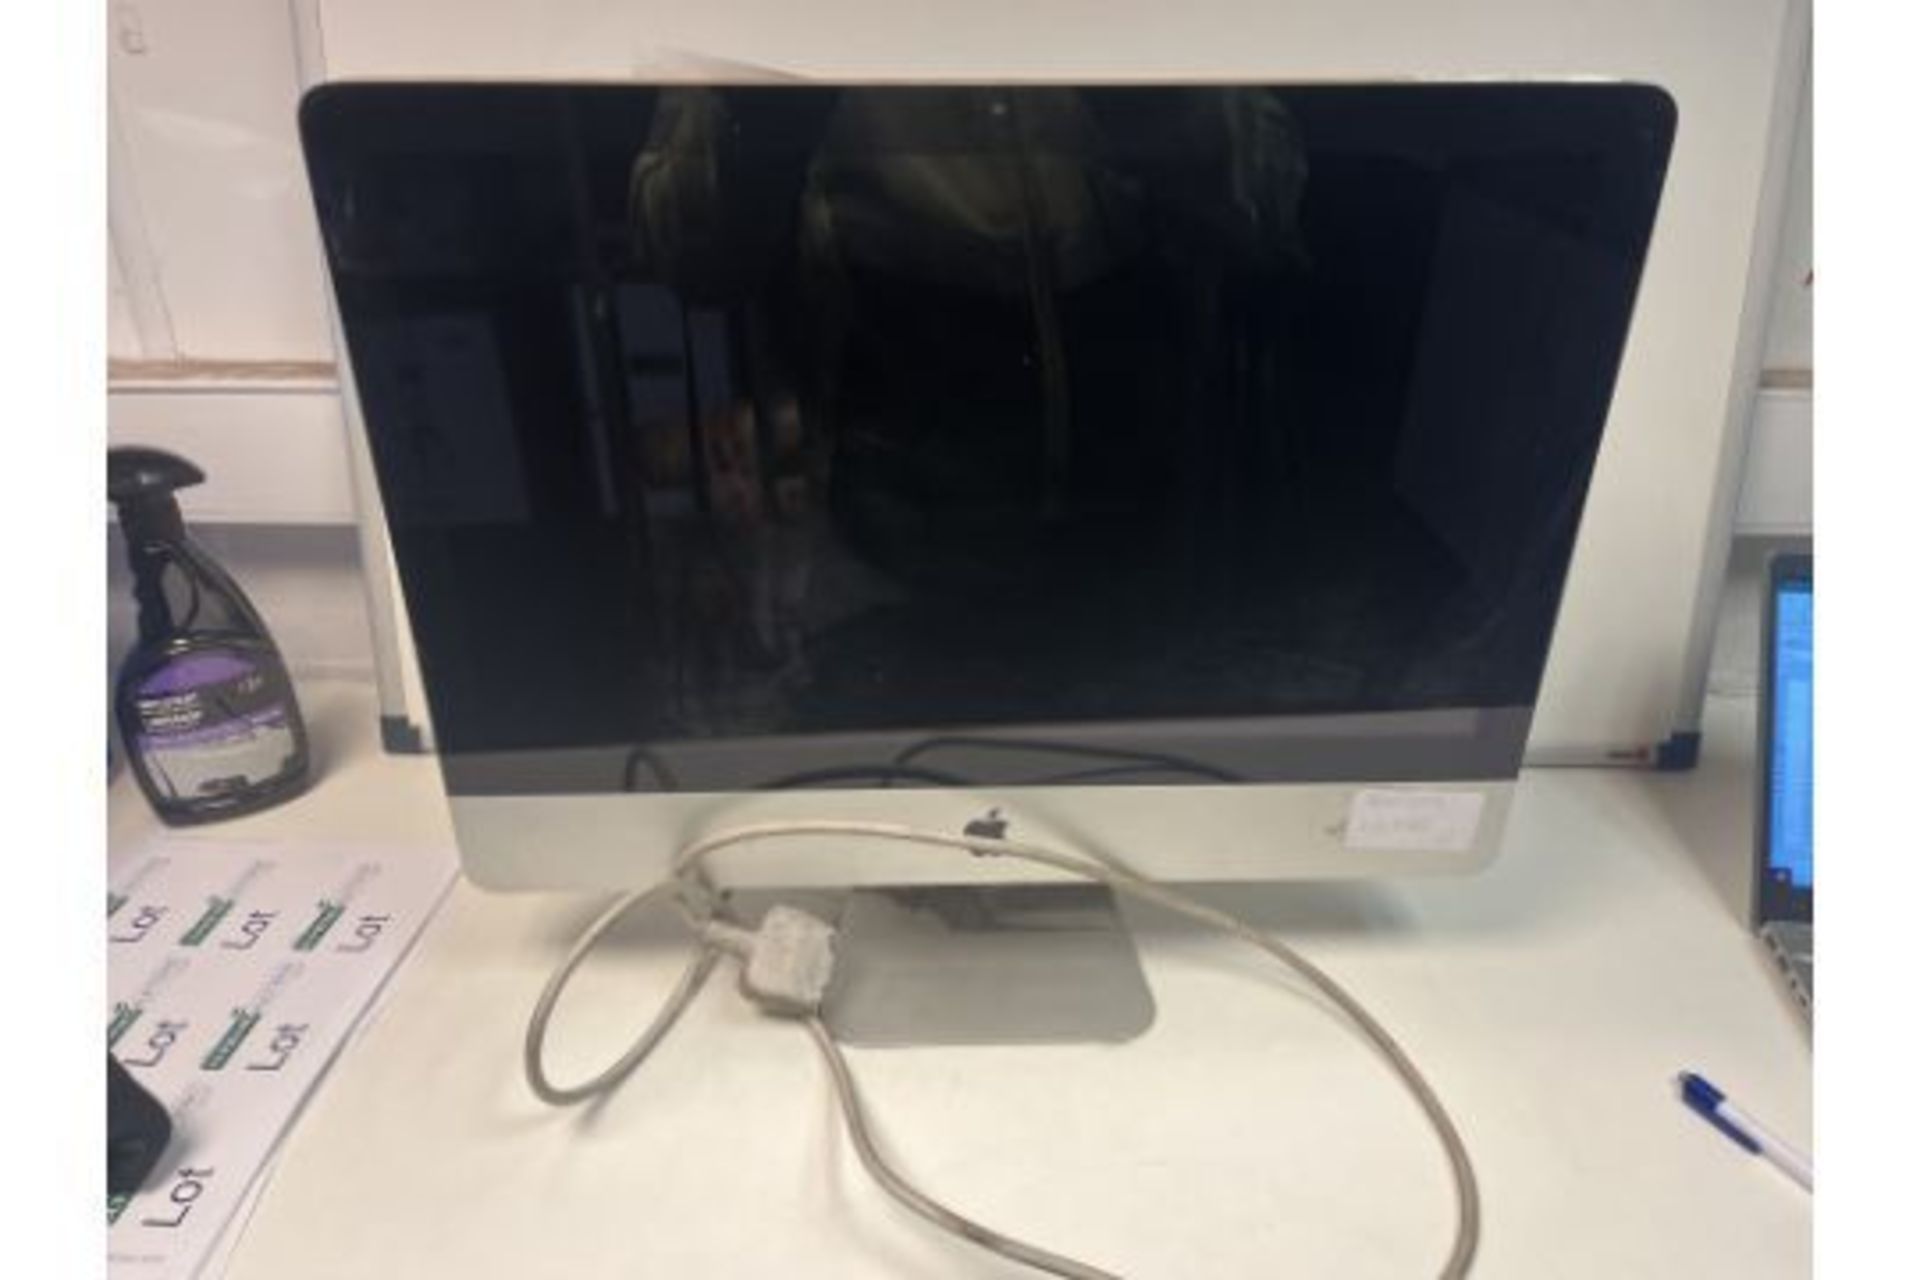 APPLE MAC ALL IN ONE PC, INTEL CORE i5, 2.5GHZ, HIGH SIERRA OPERATING SYSTEM, 500GB HARD DRIVE